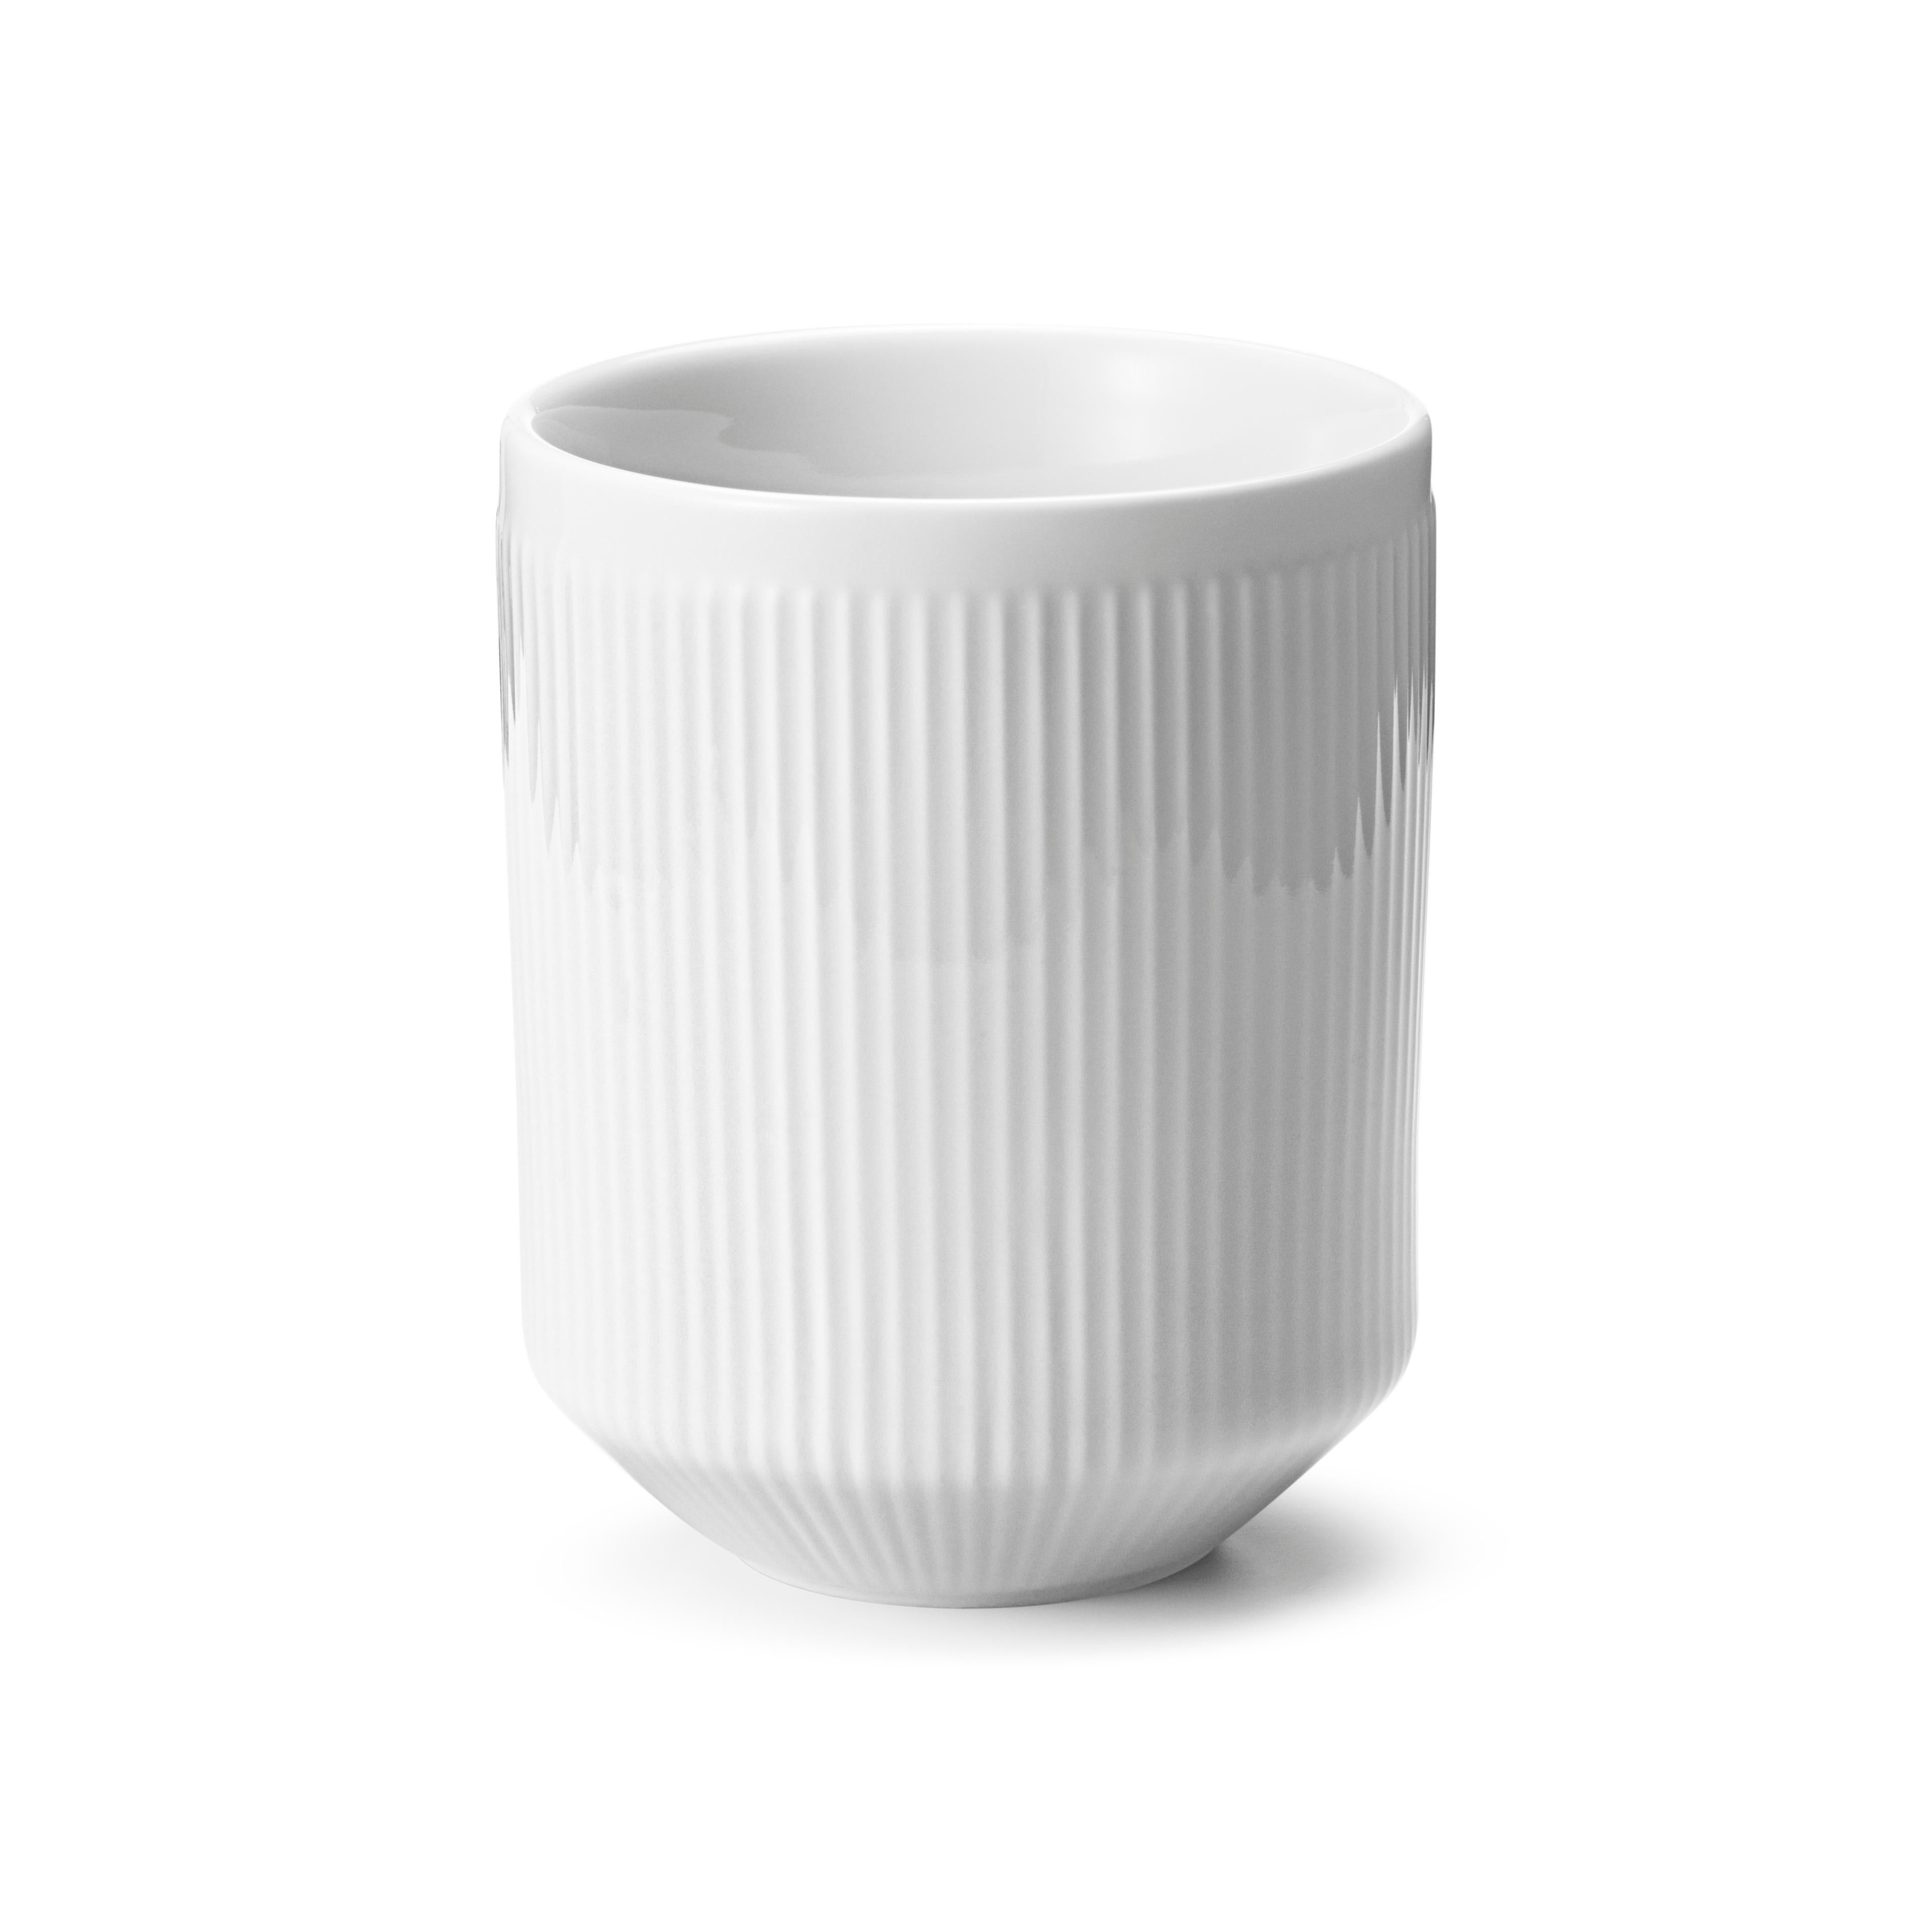 A beautiful example of Scandinavian design, these white porcelain thermo mugs combine both form and function whilst retaining a cool and contemporary aesthetic. The fine grooves on the surface reference early Art Deco style and give a minimalist